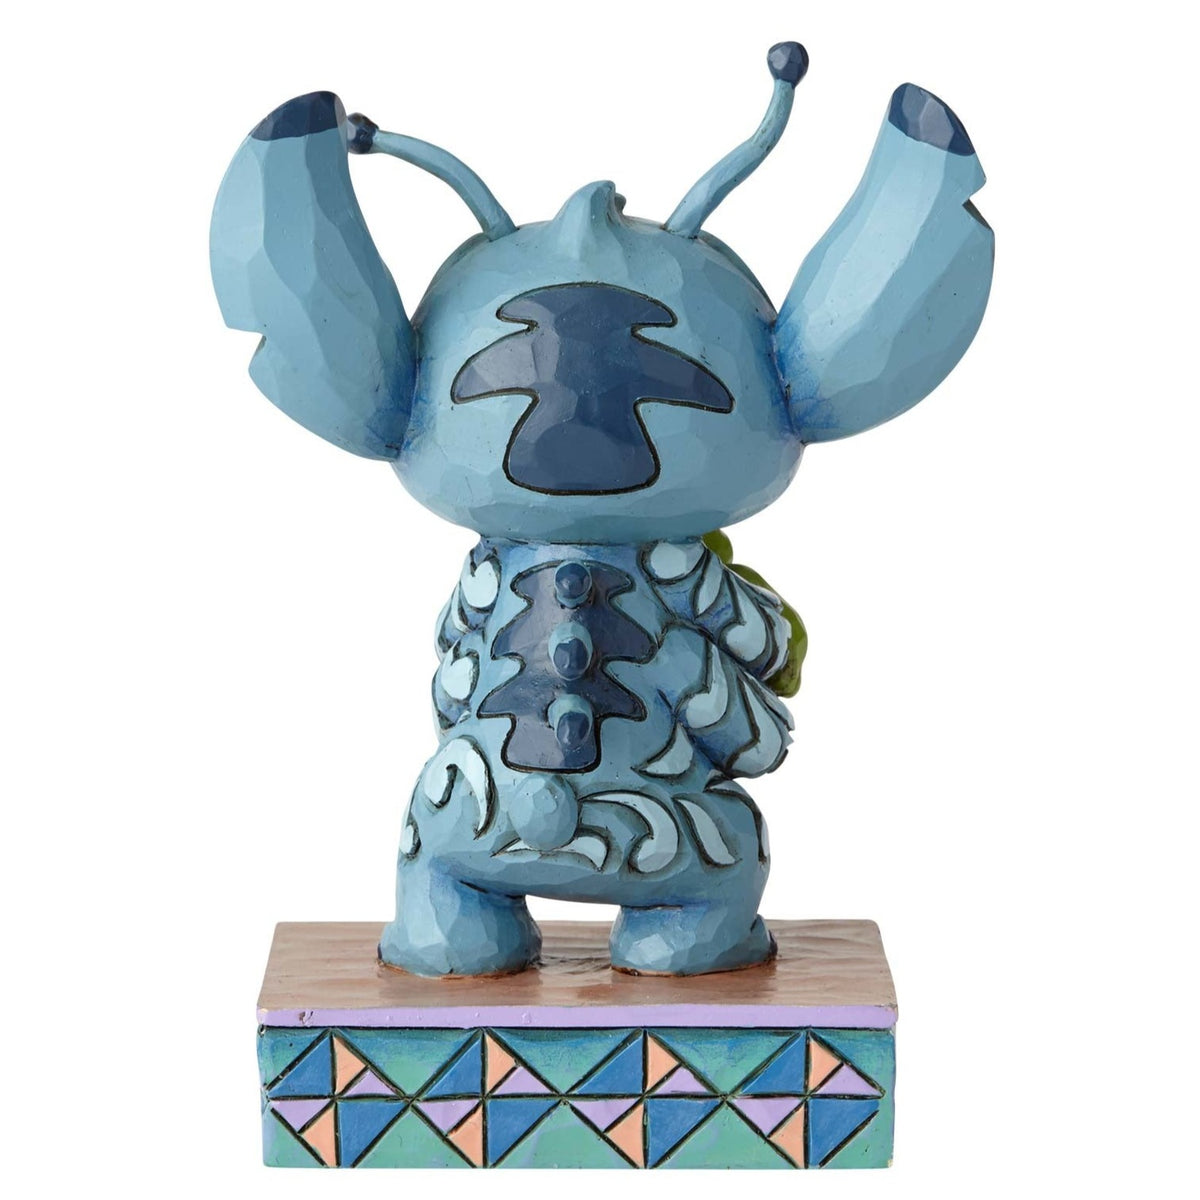 Jim Shore Lilo and Stitch An Alien Hatched! Easter Egg Figurine